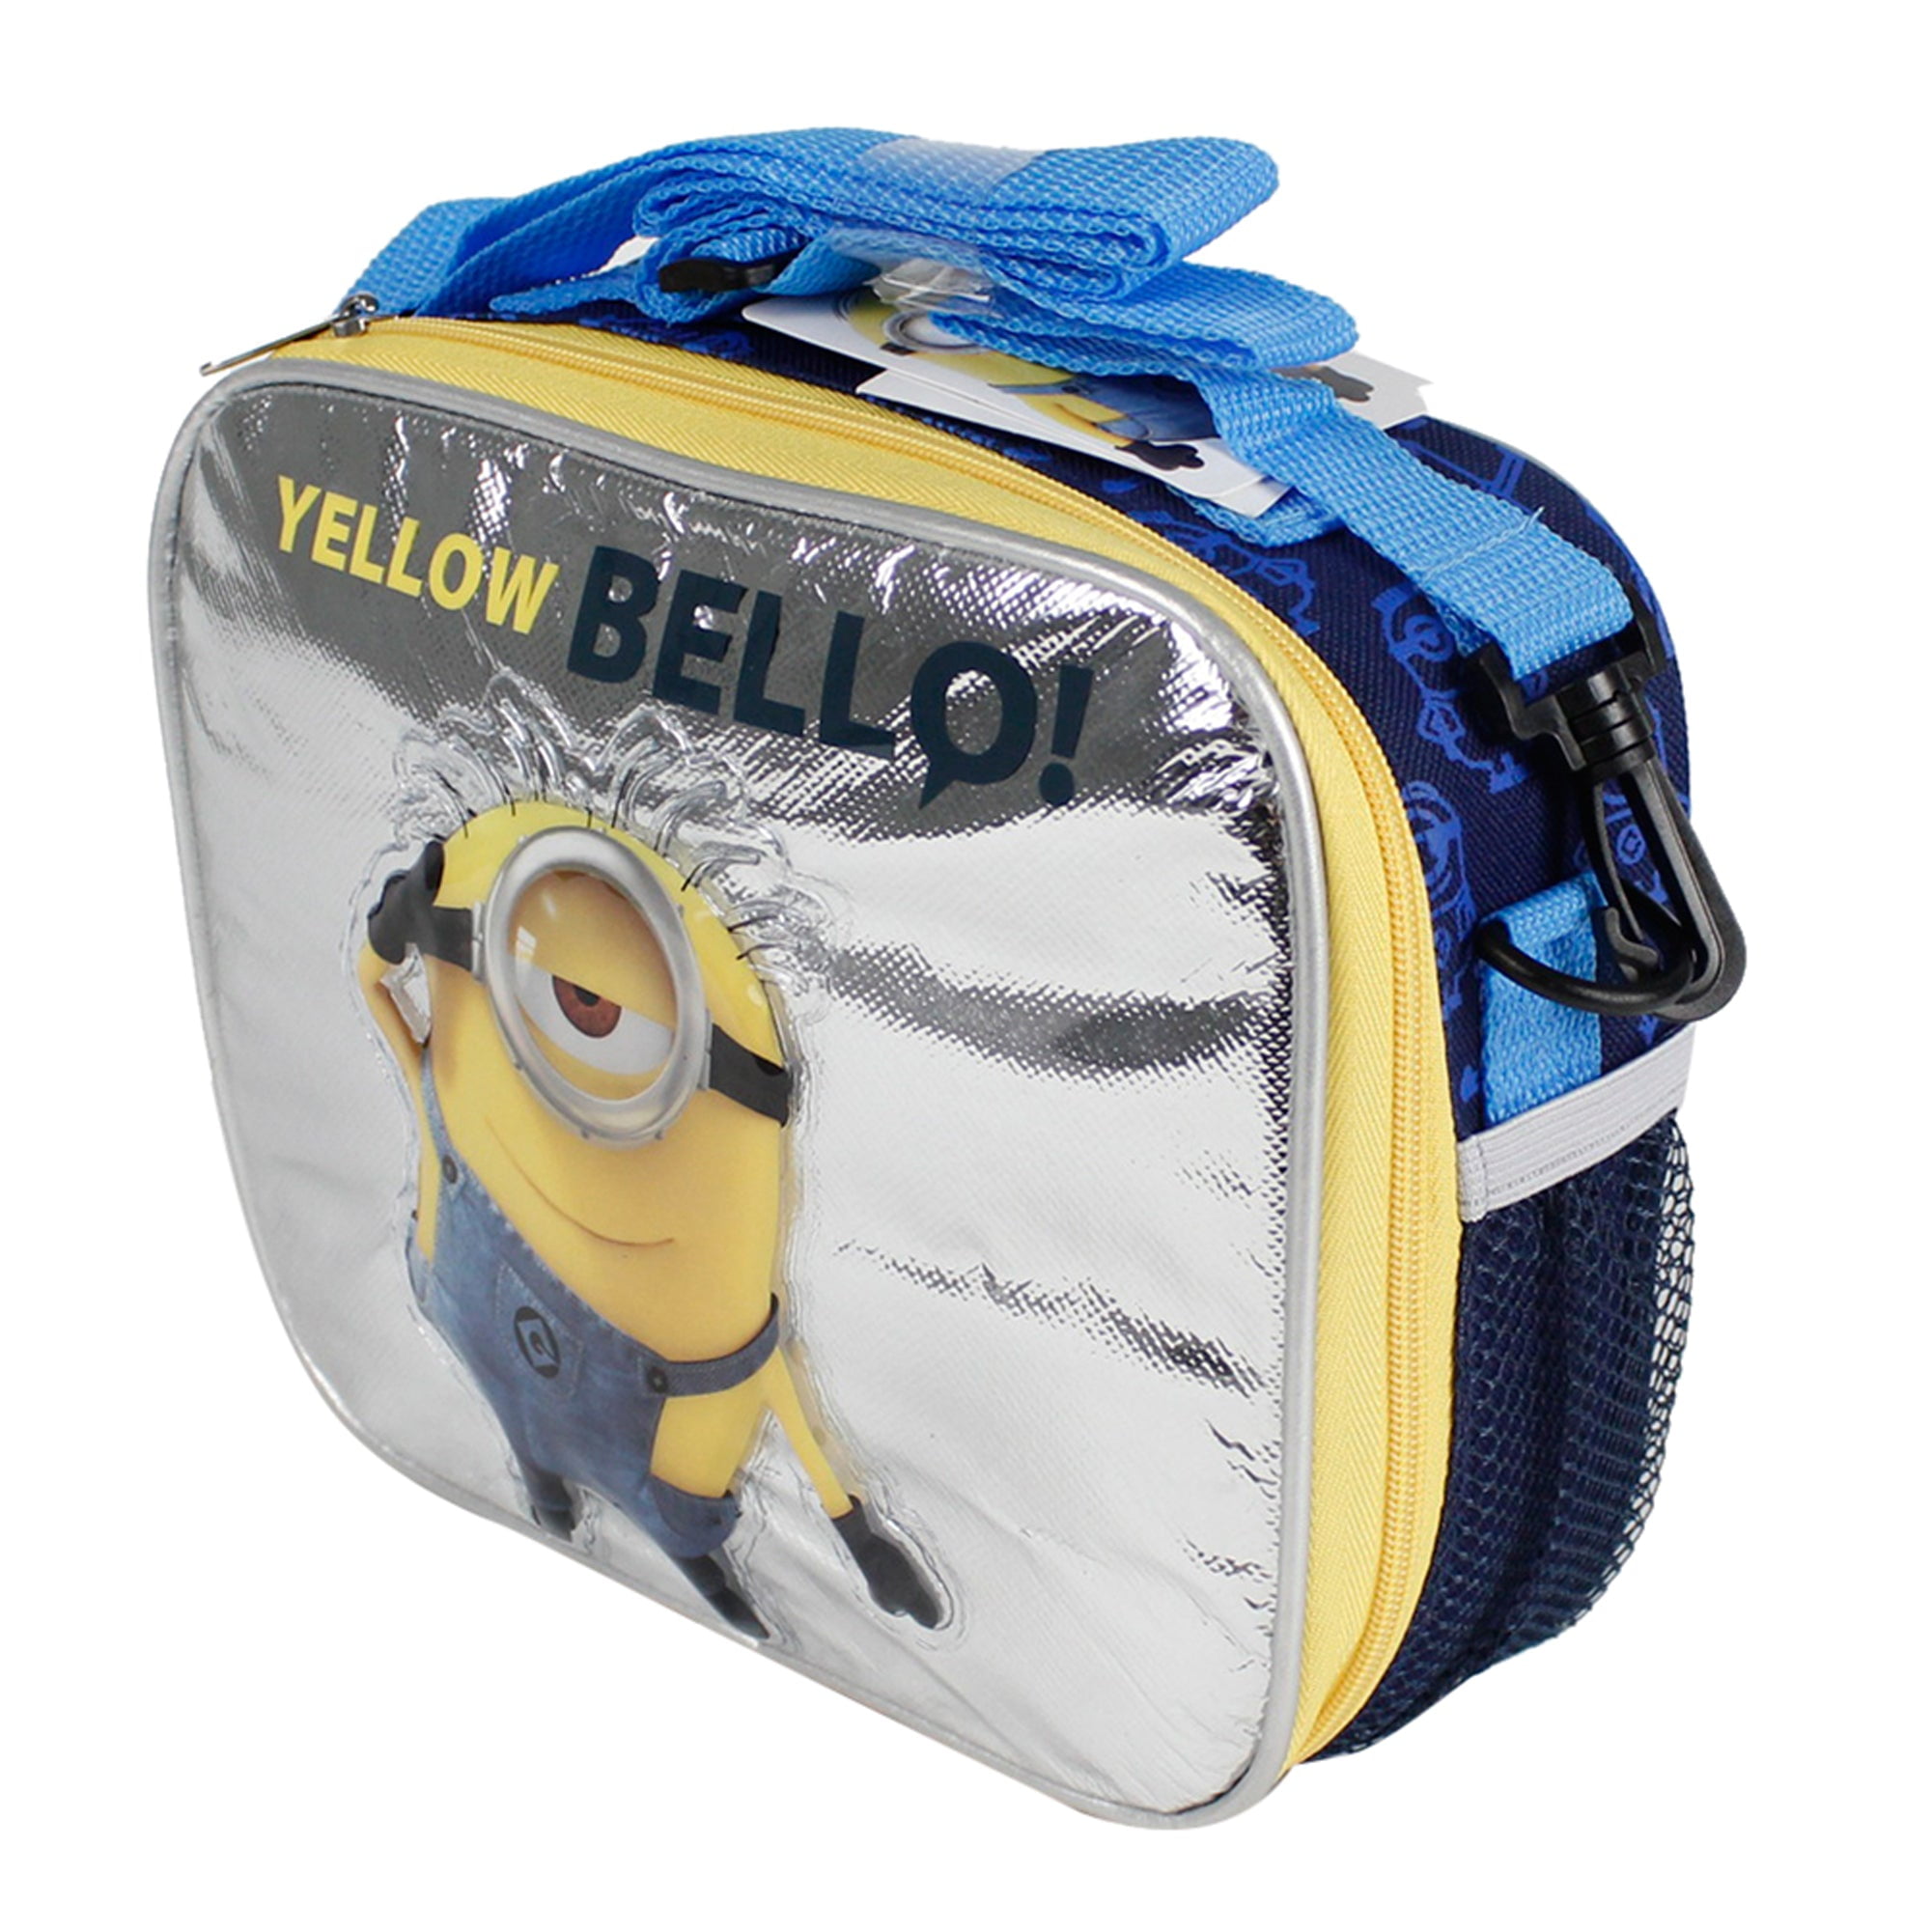 Despicable Me Lunchbox with Sandwich Box